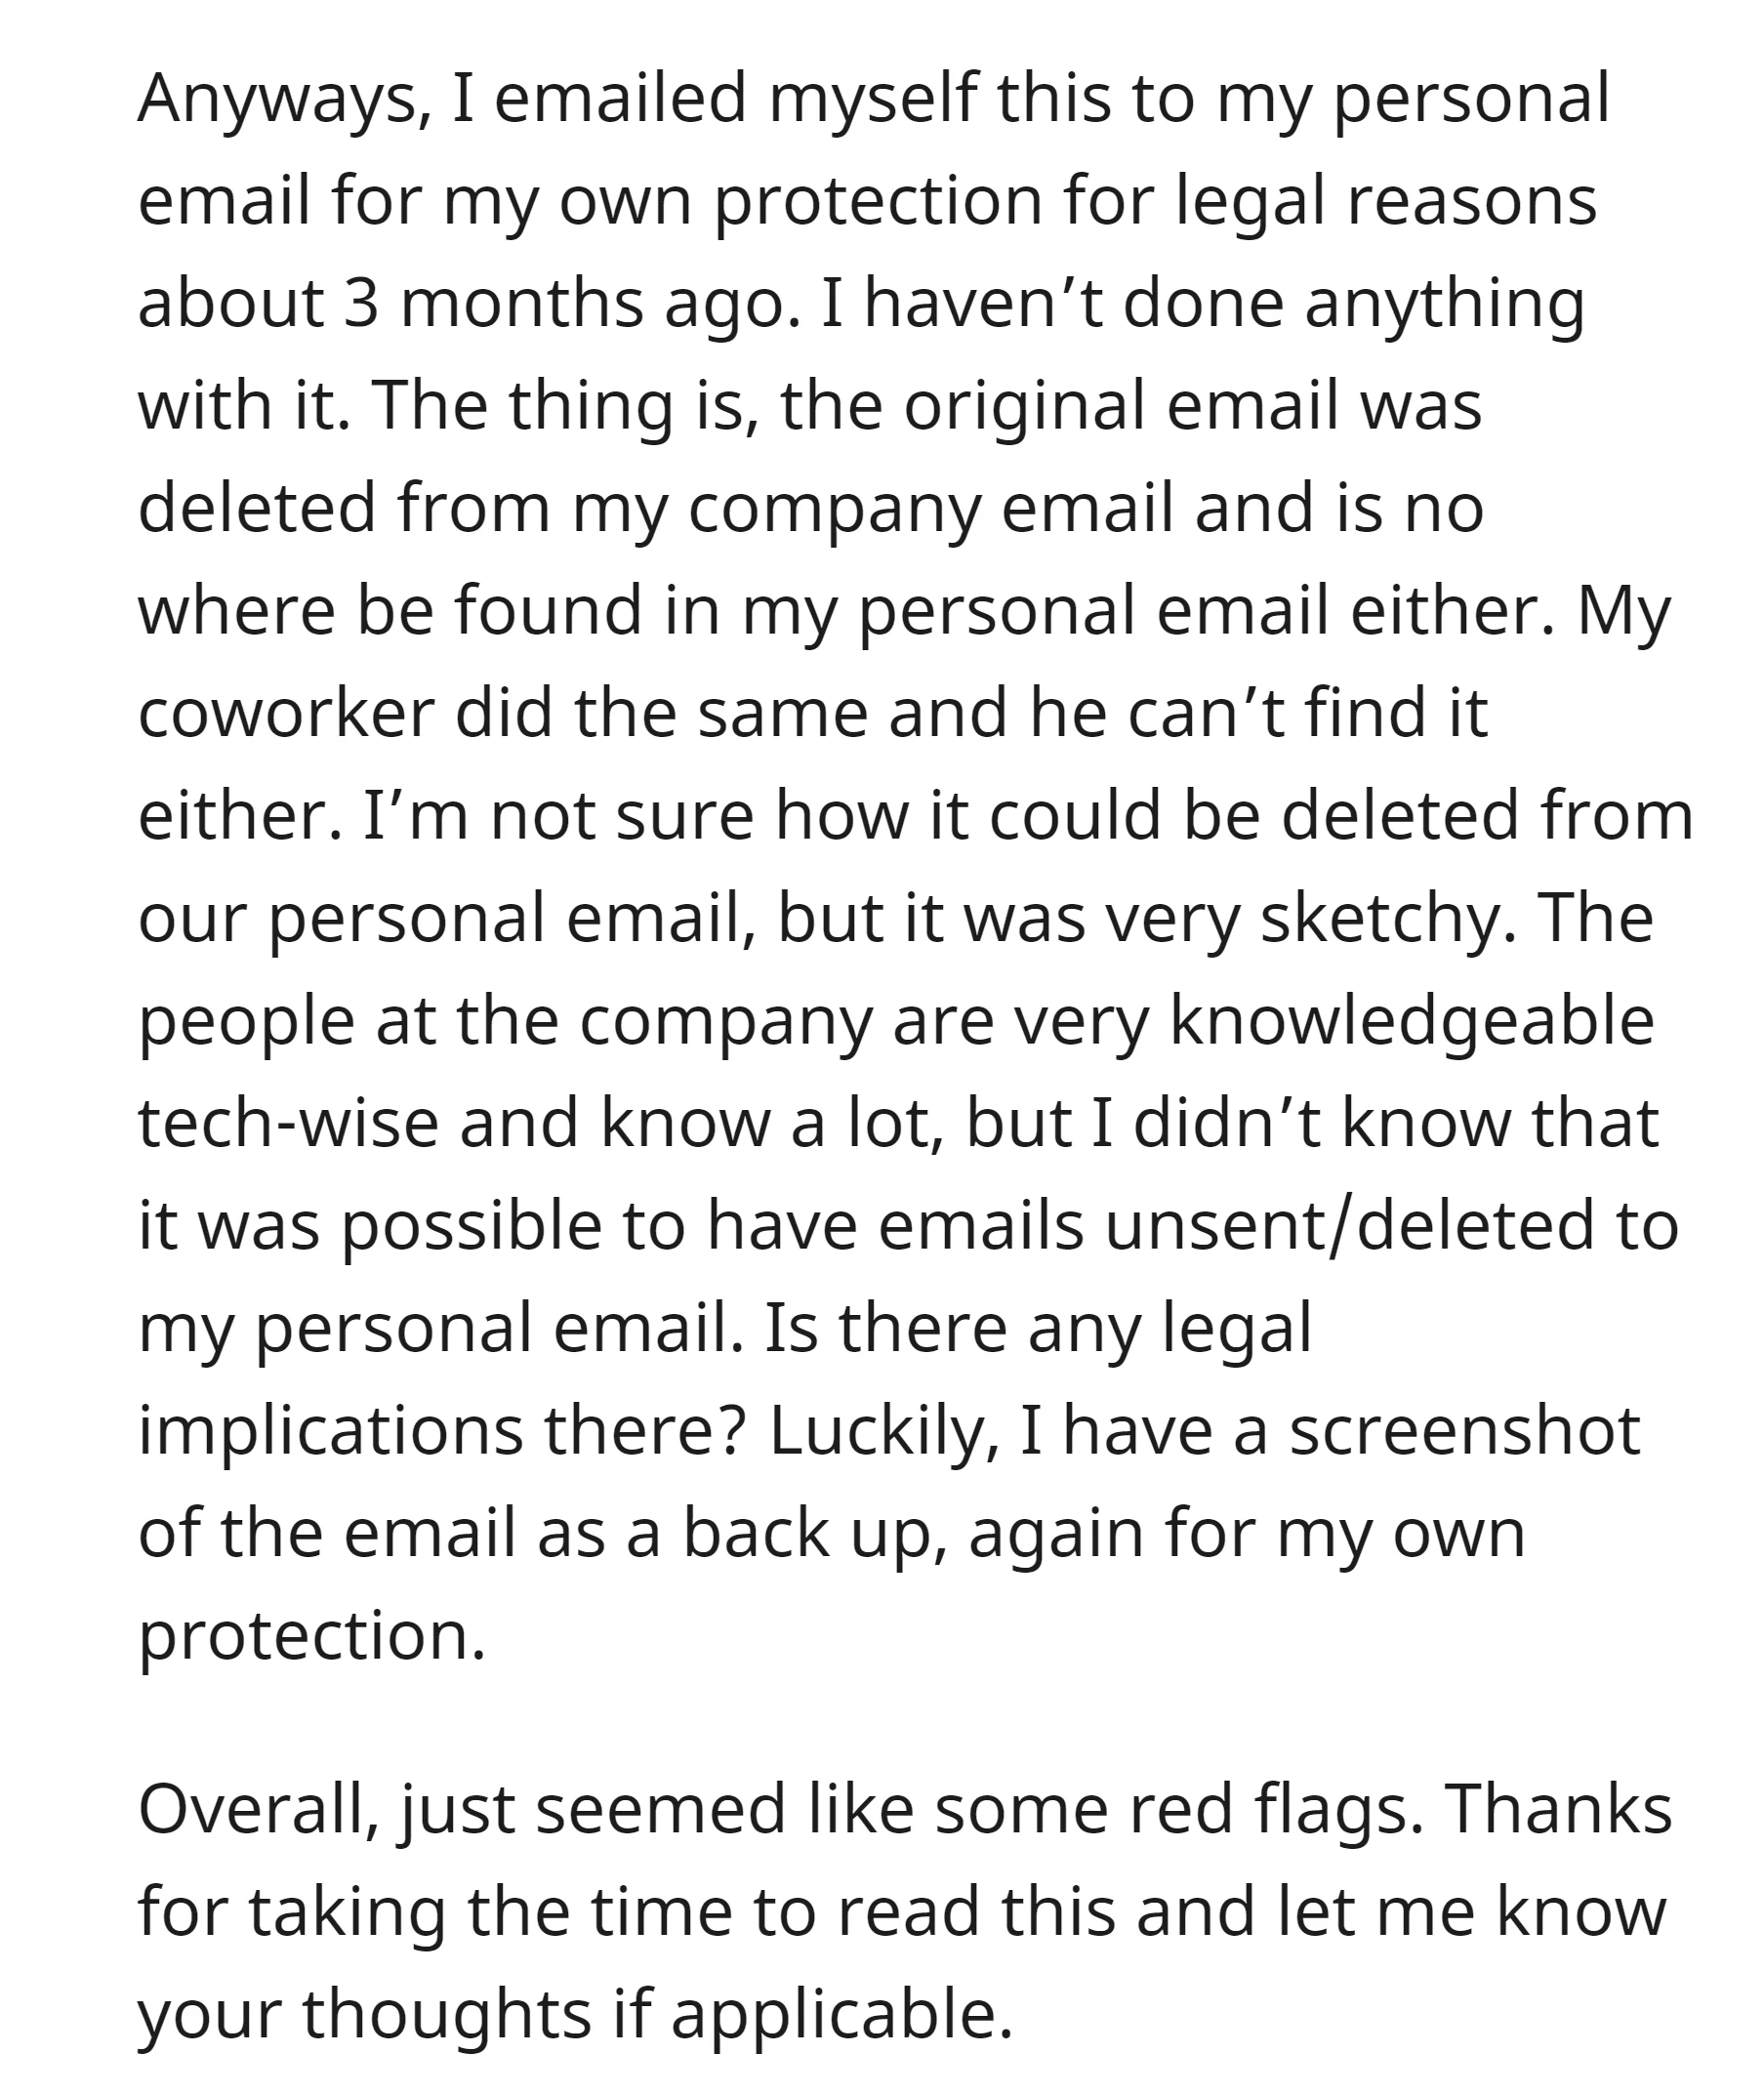 OP emailed themselves a crucial company communication about salary discussions for legal protection